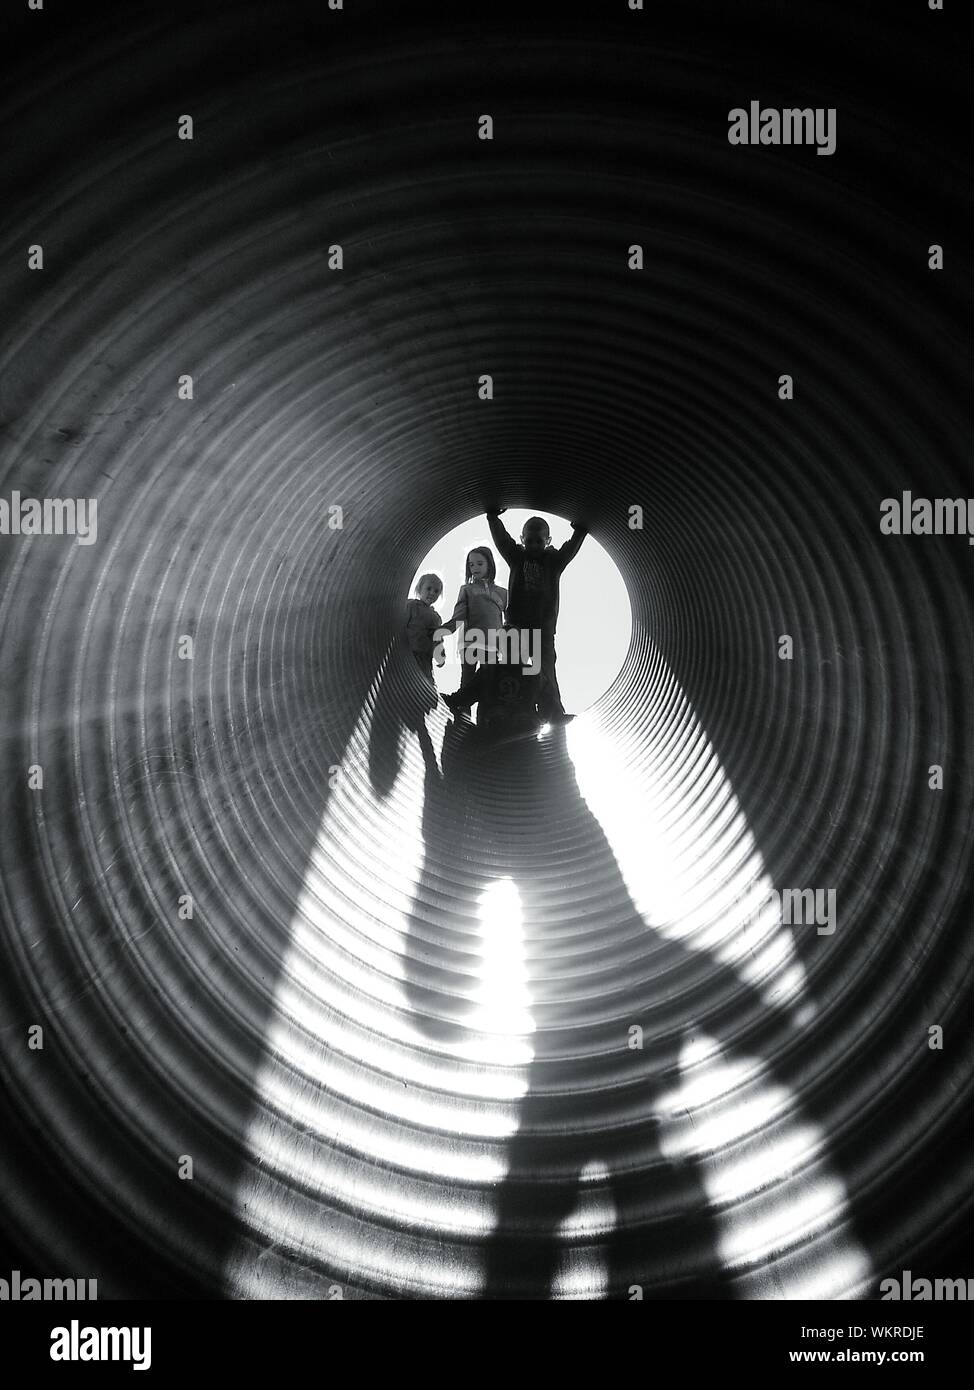 Children Playing In Tunnel Slide At Playground Stock Photo Alamy